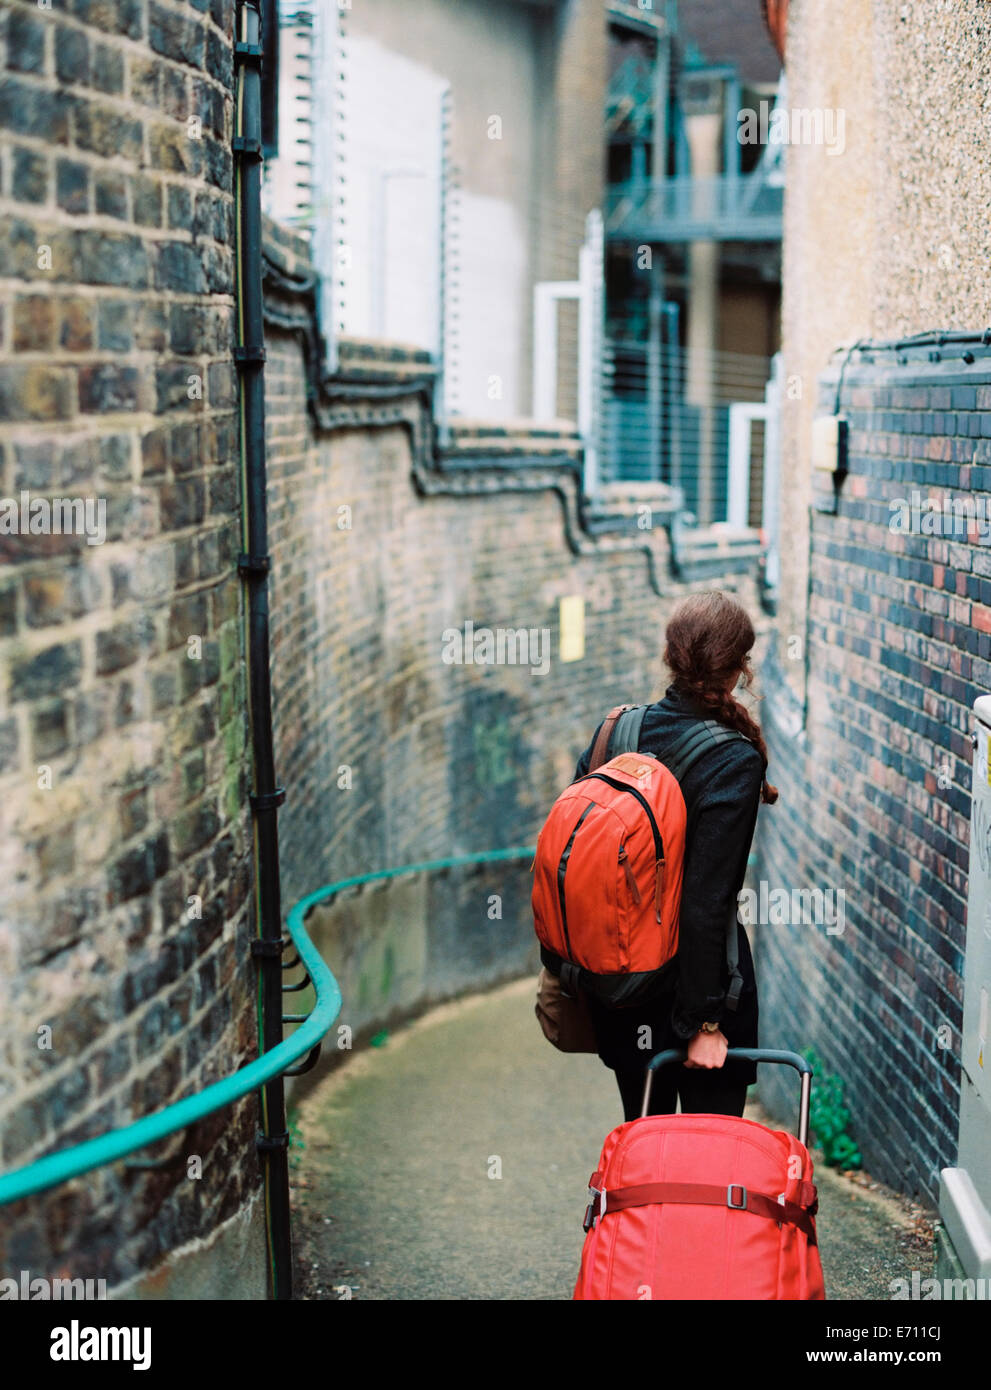 A woman walling down a narrow street, pulling a suitcase and holdin an orange backpack. Stock Photo